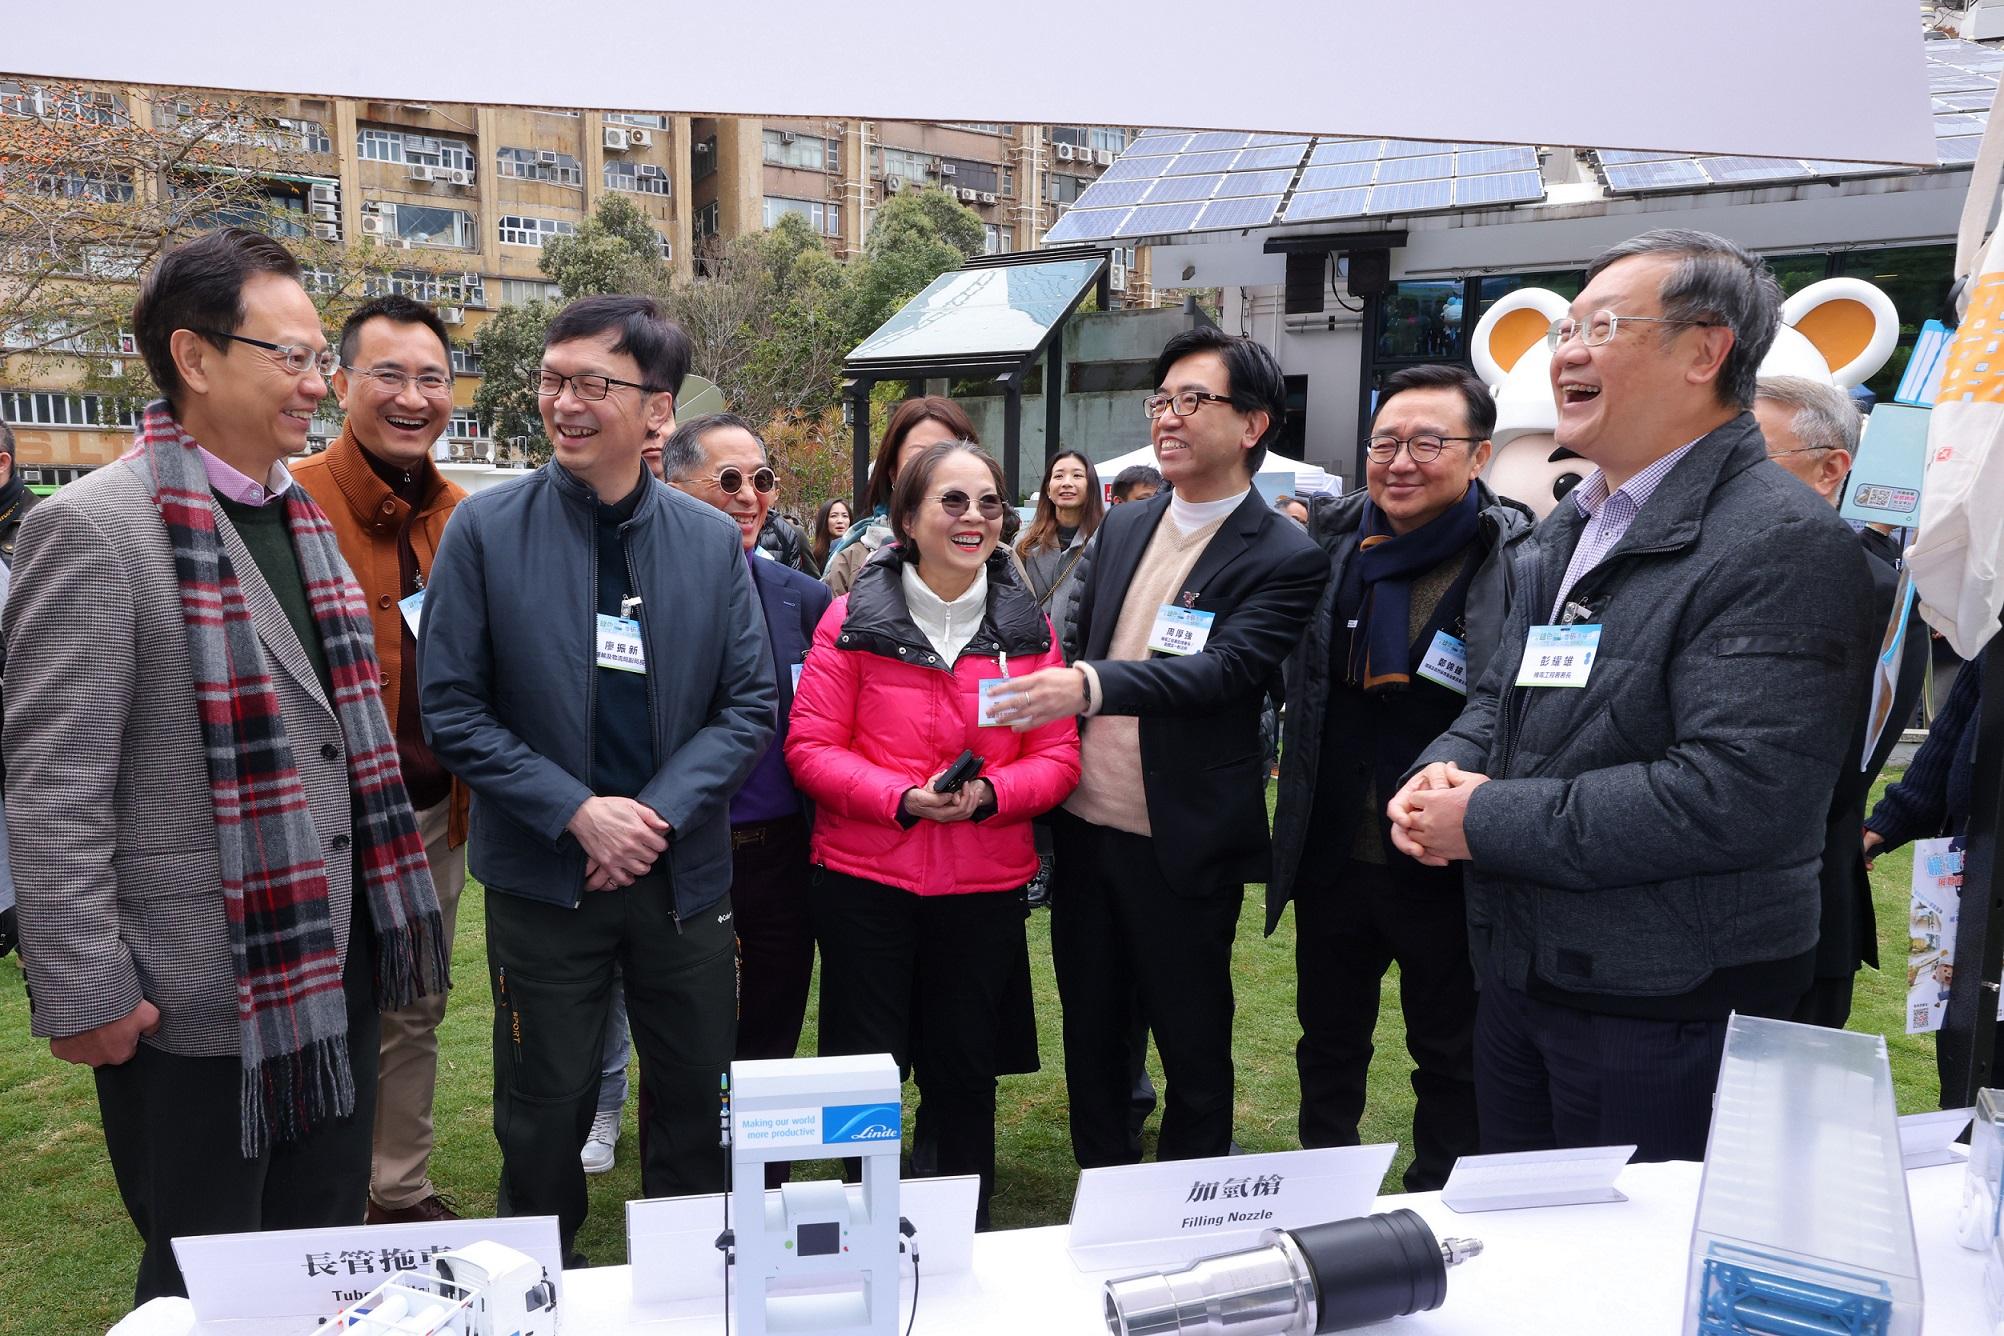 The "Green Travel for a Zero Carbon Future" - New Energy Bus Experience Day and Carnival was held at CIC-Zero Carbon Park today (March 2). Photo shows the Under Secretary for Environment and Ecology, Miss Diane Wong (centre), and other guests visiting exhibition booths.